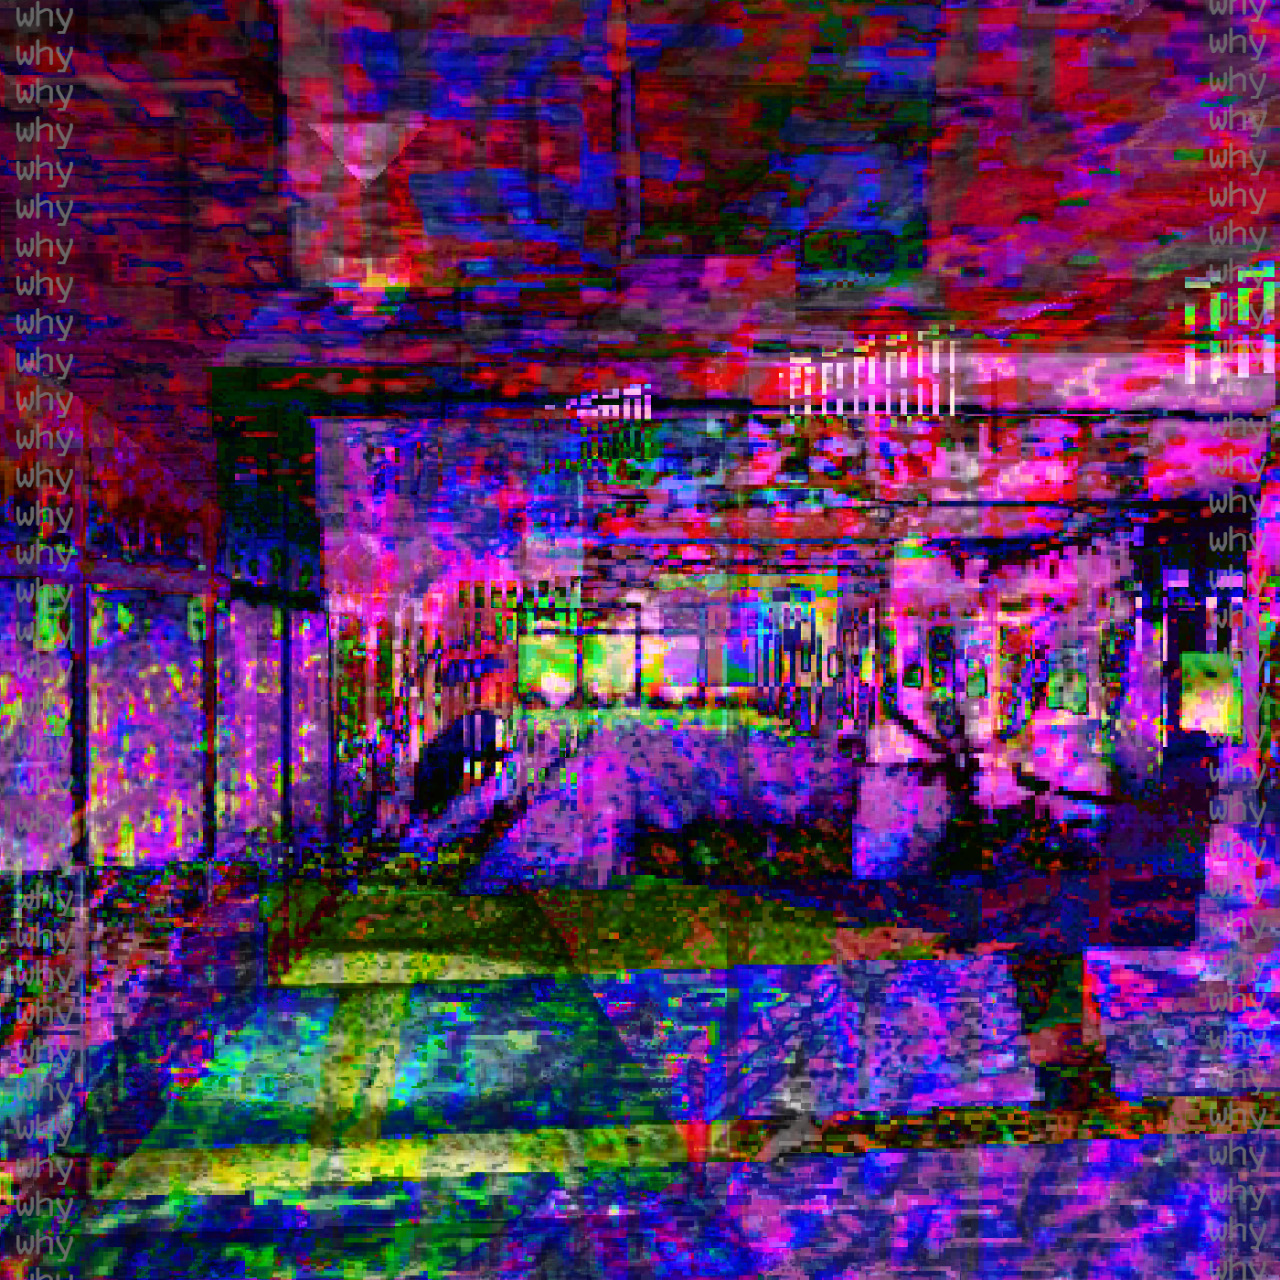 Glitch Photography on Tumblr - #dreamcore